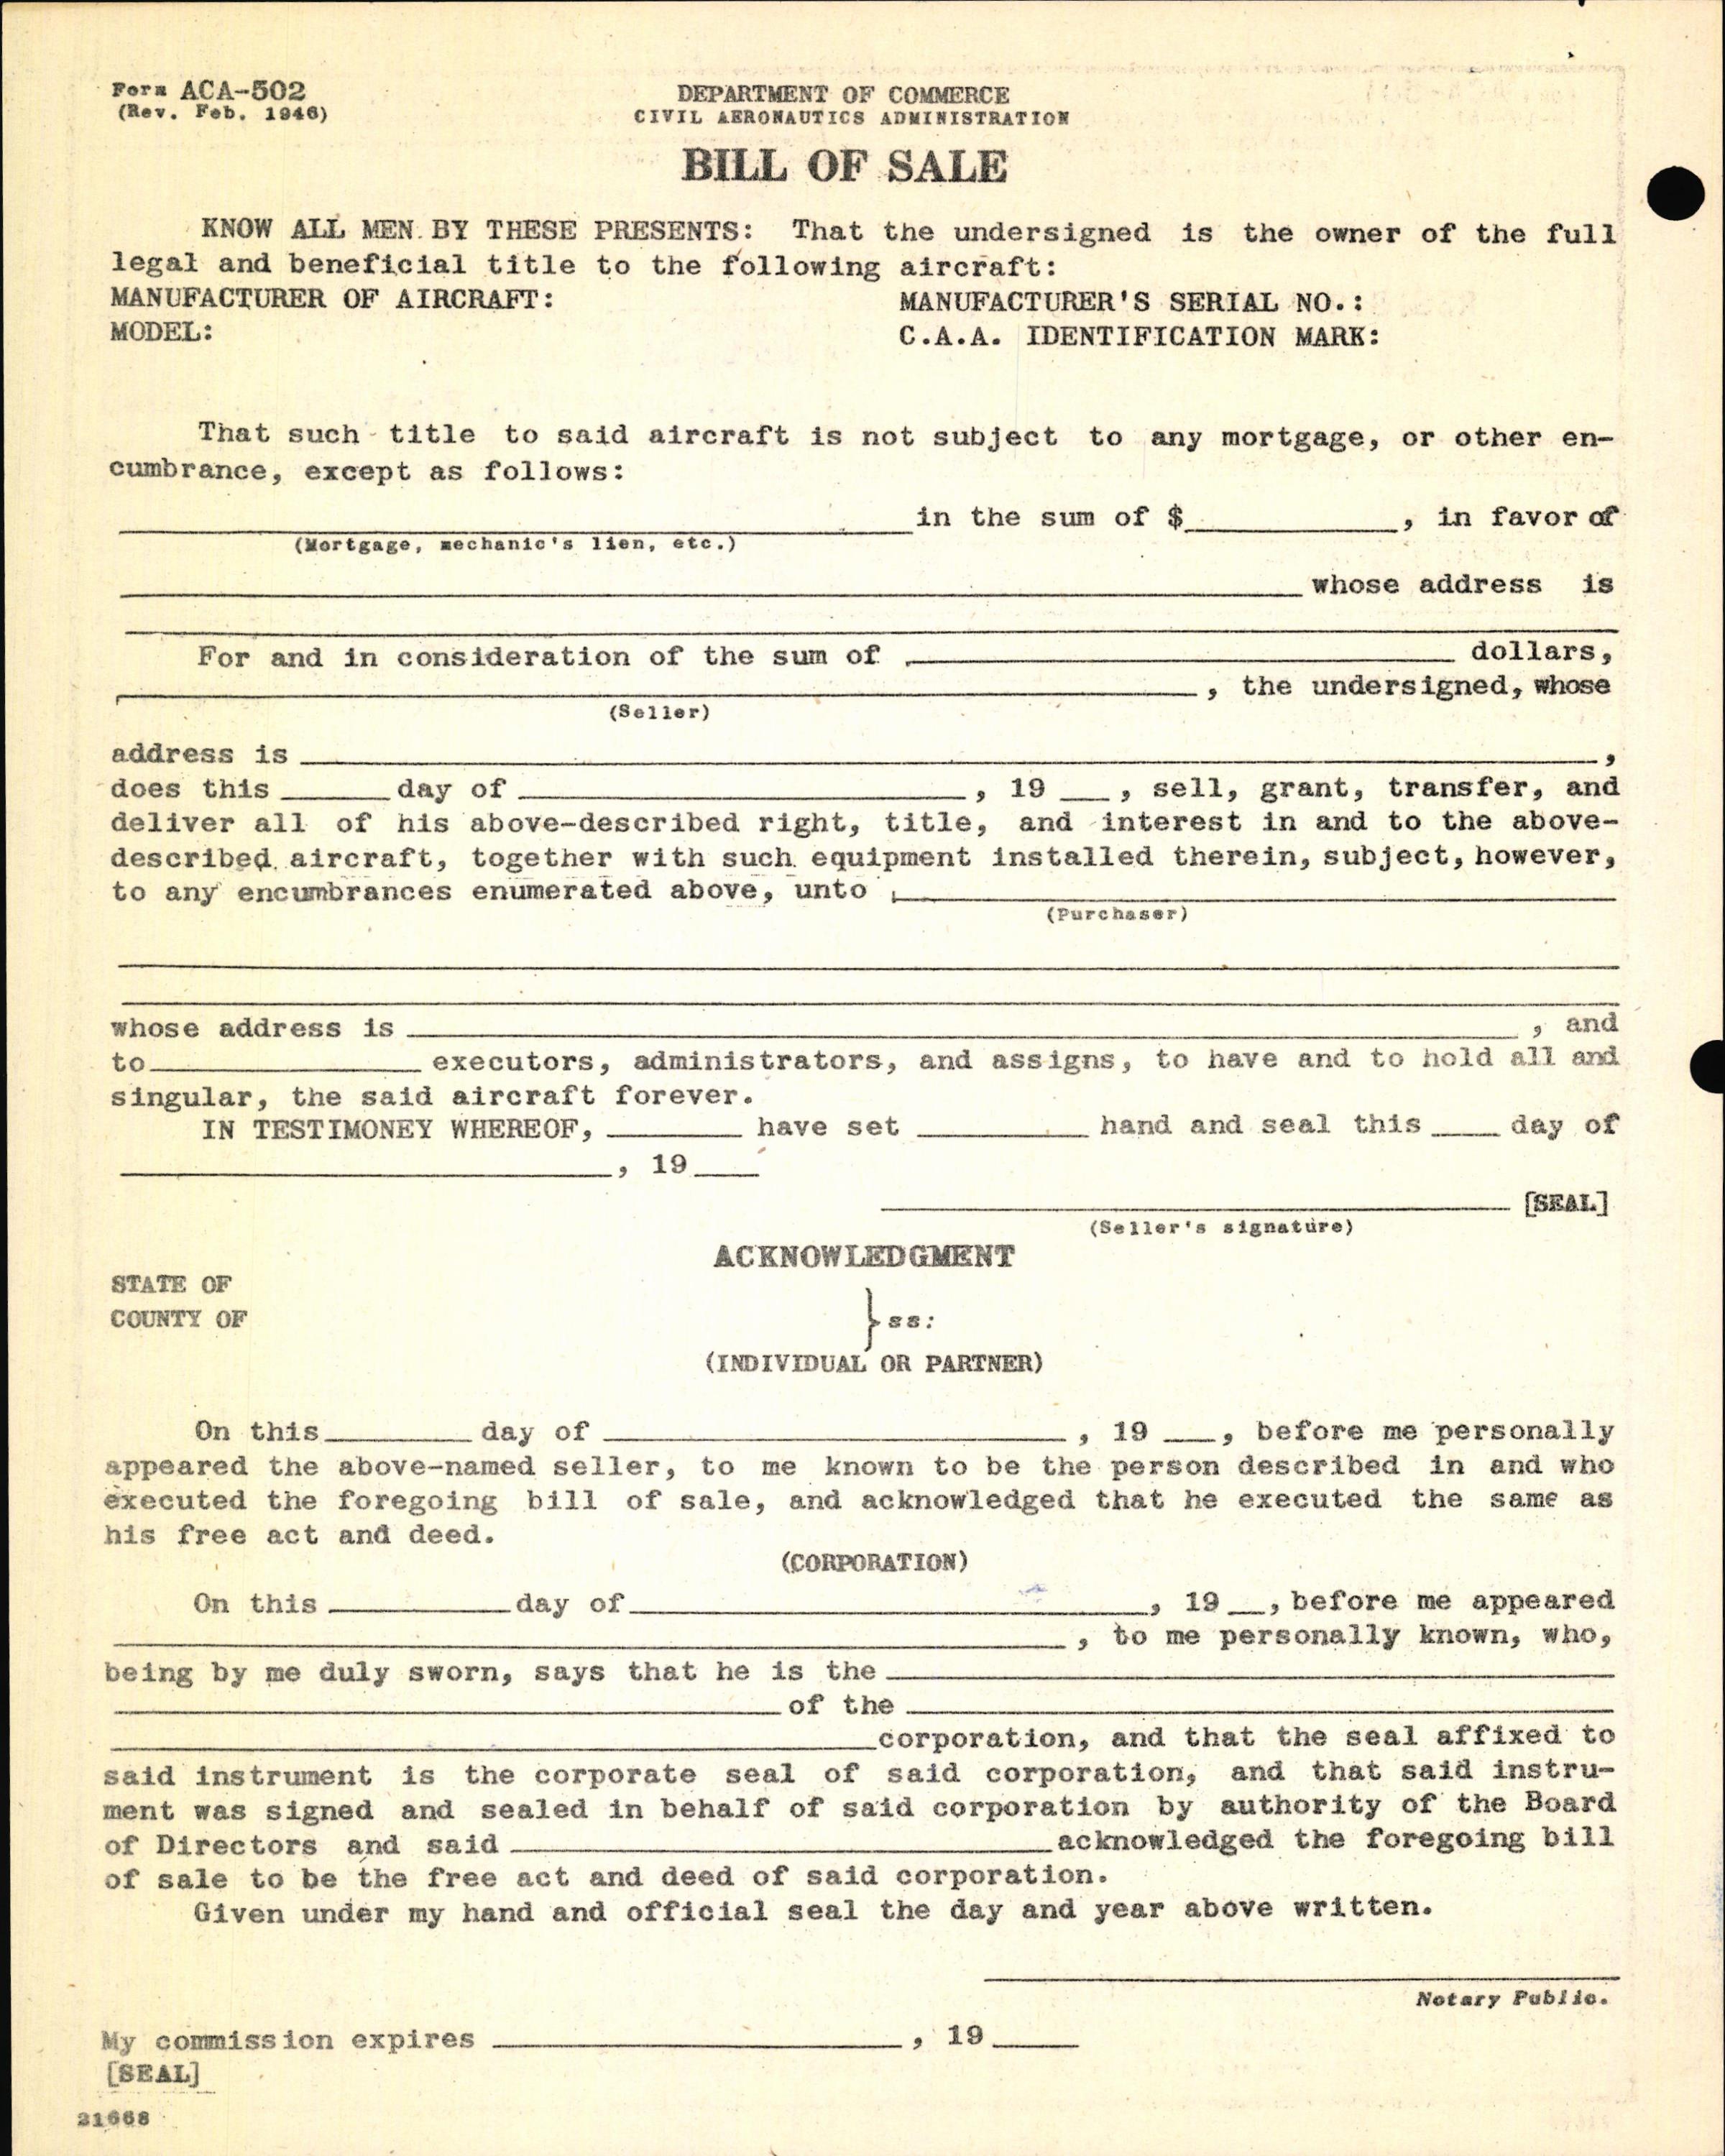 Sample page 4 from AirCorps Library document: Technical Information for Serial Number 1226